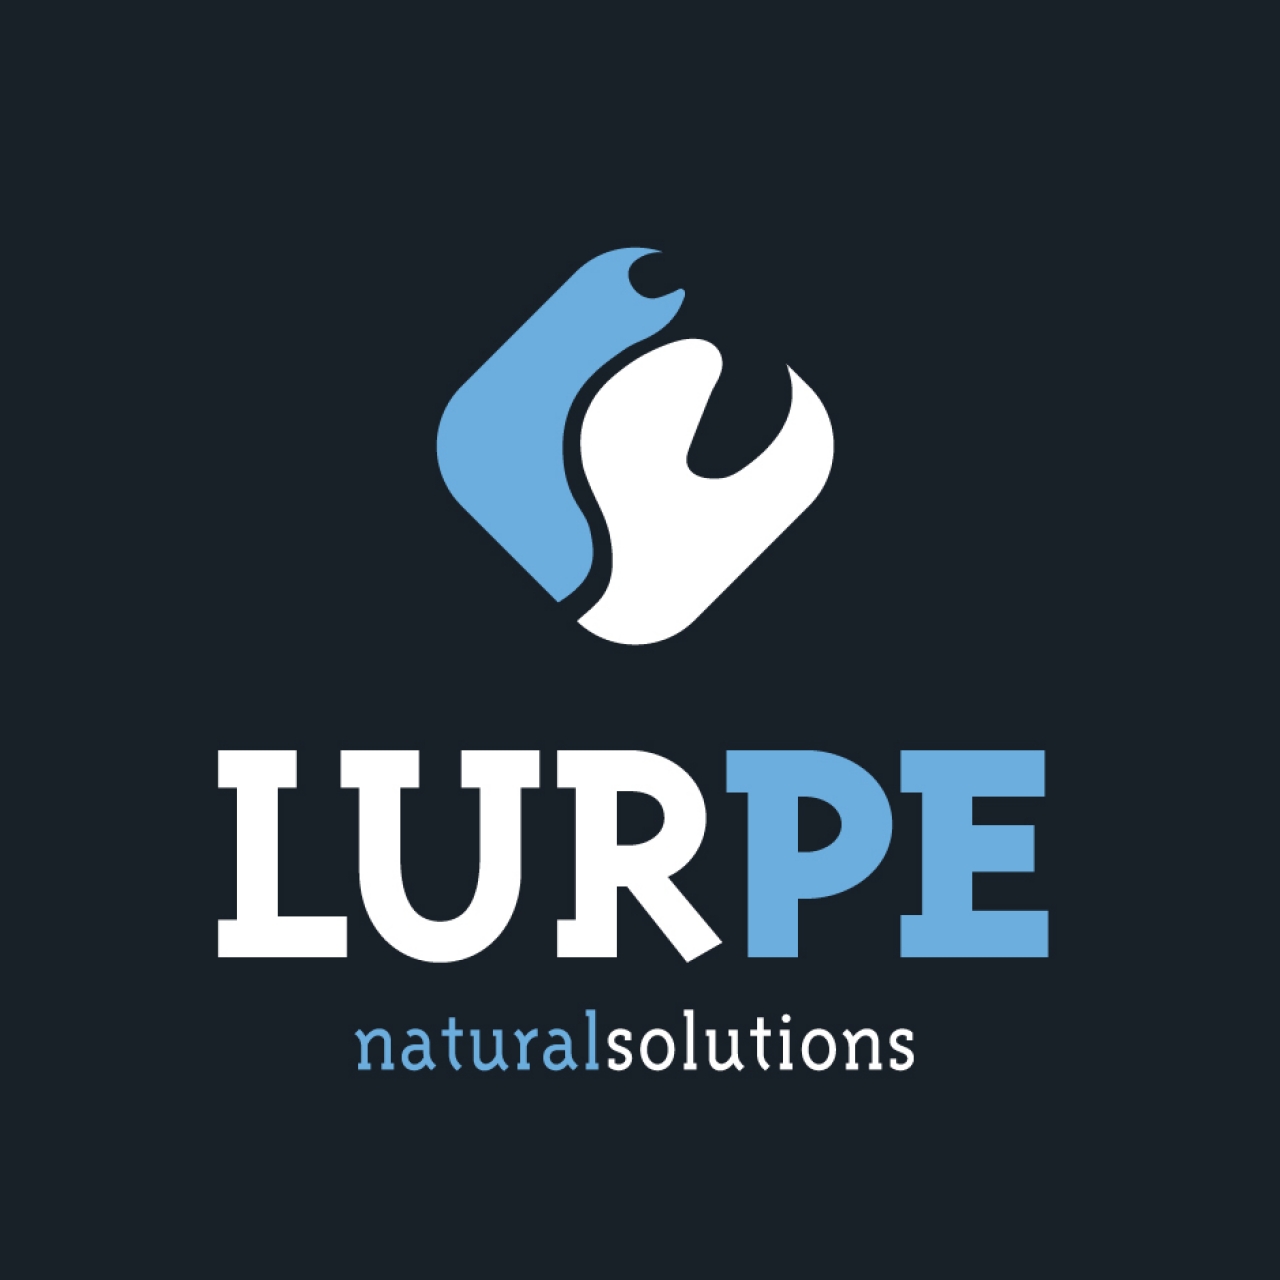 Lurpe, Natural Solutions